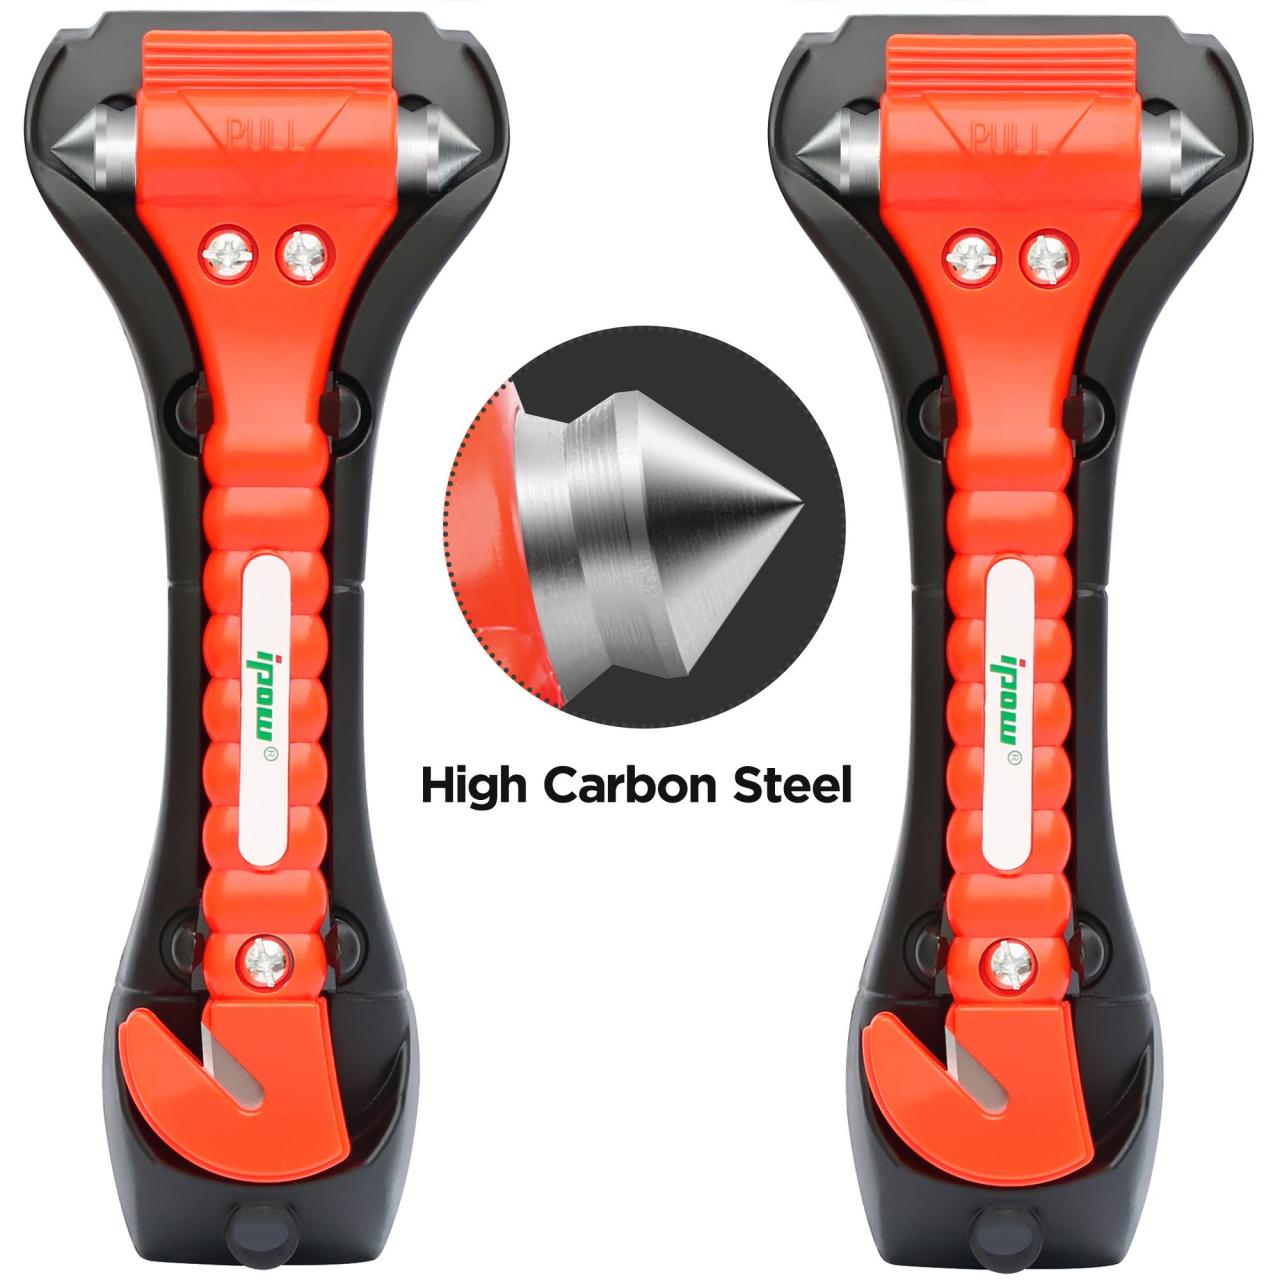 2 PCS High Carbon Steel Hard IPOW Car Safety Hammer Escape Tool With  Antiskid Seatbelt Cutter, Life-Saving Emergency Glass/Window Punch Breaker  Auto Rescue Disaster Hammer- Buy Online in Angola at angola.desertcart.com.  ProductId :